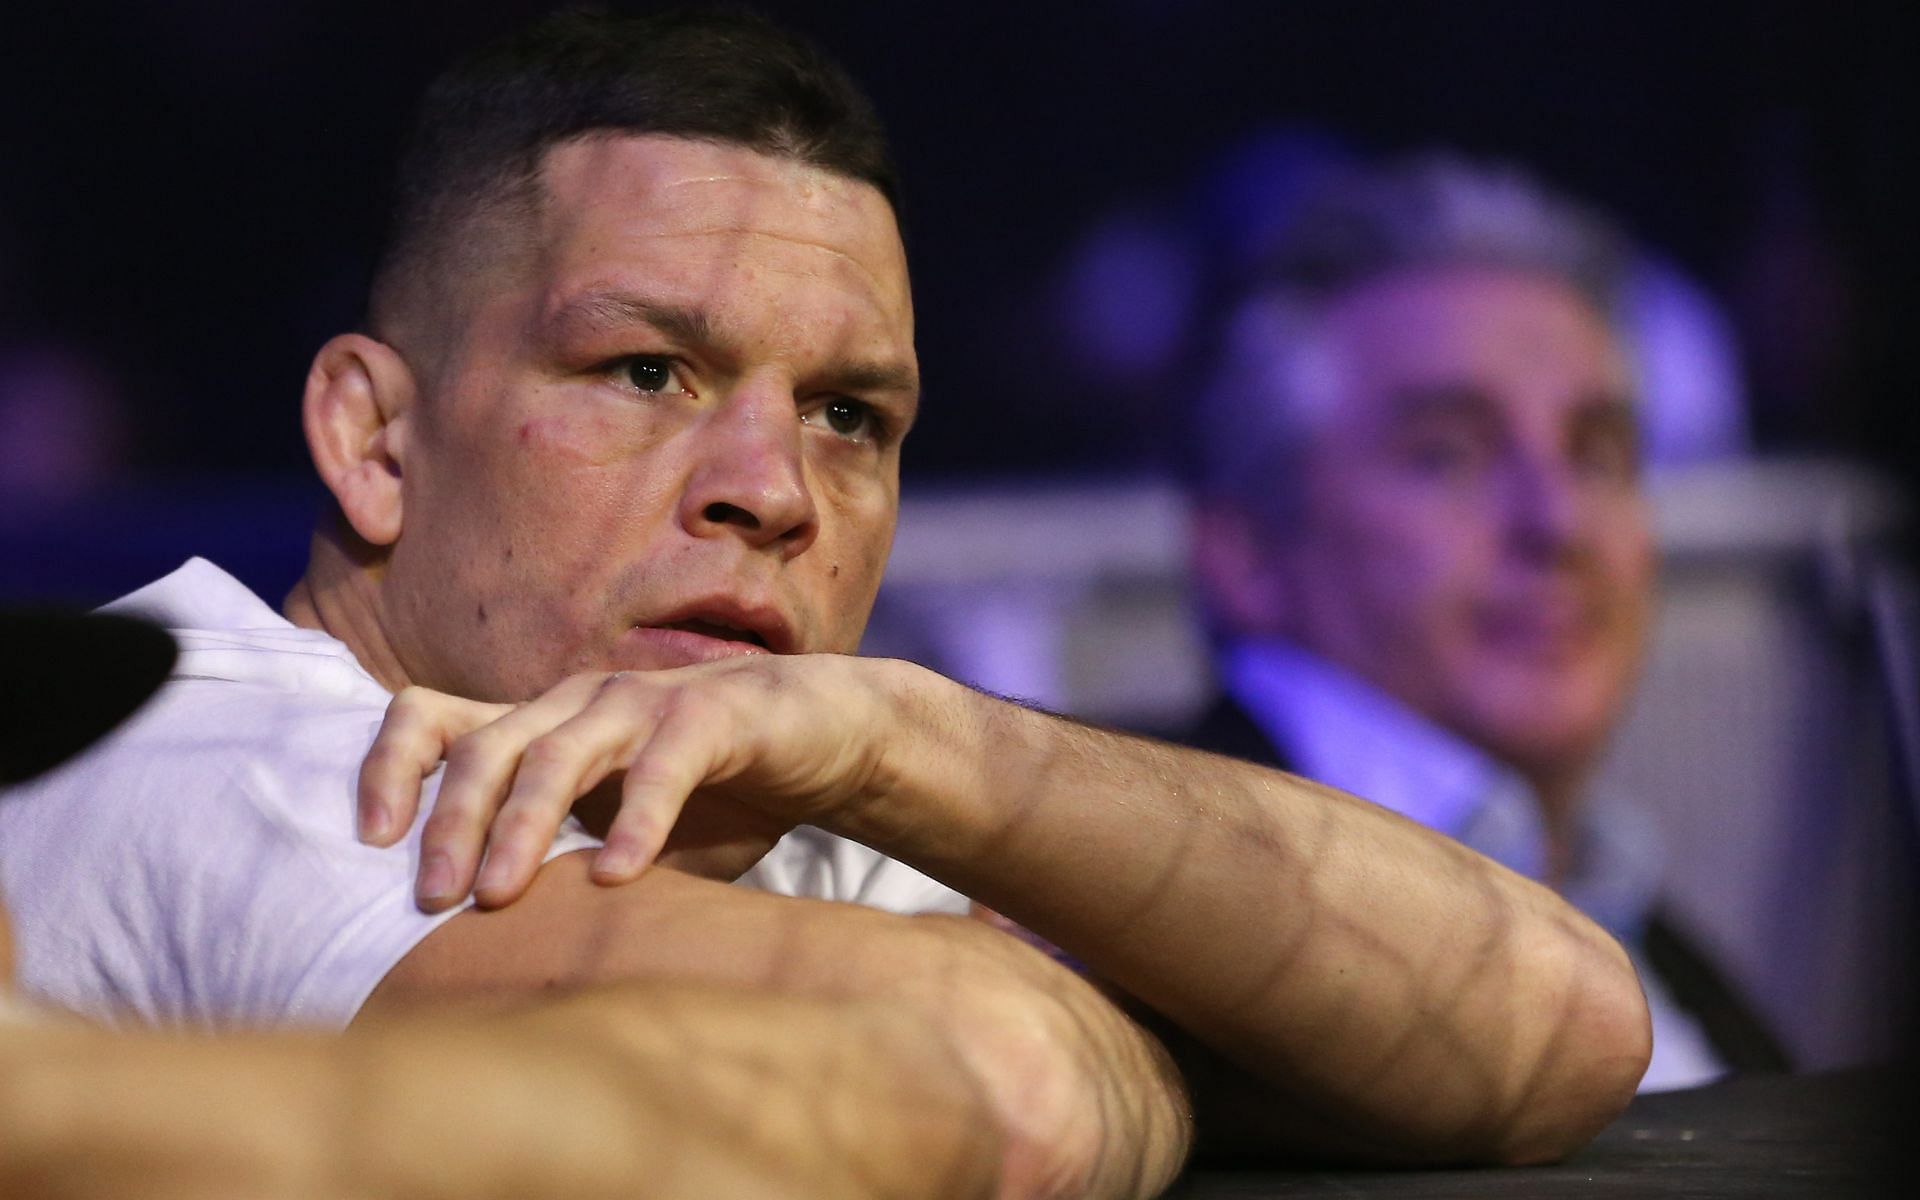 Nate Diaz is one of the biggest stars in the UFC today